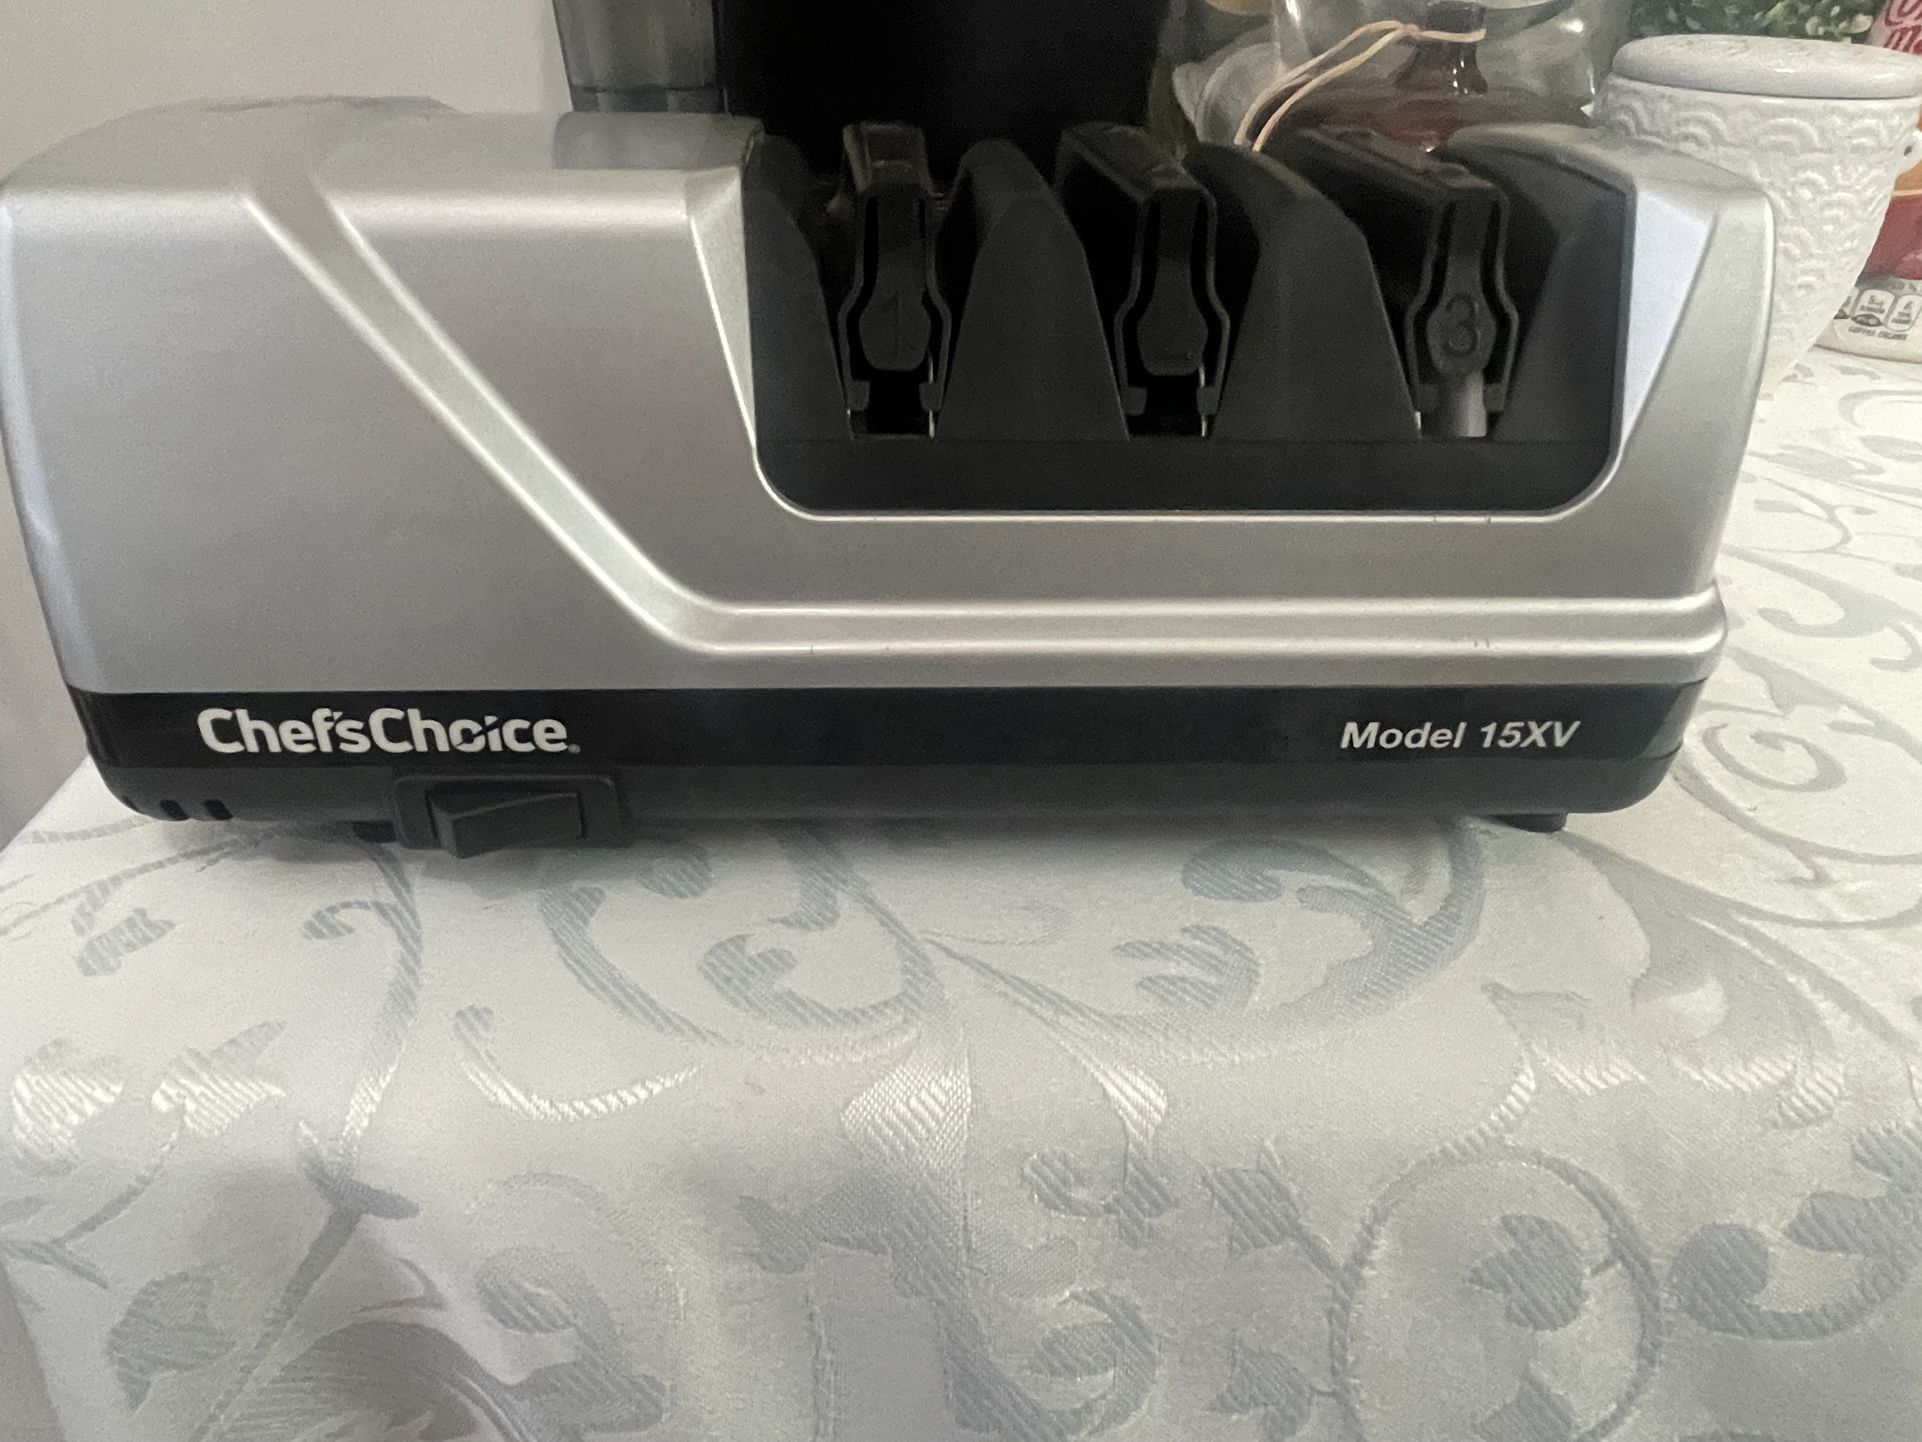 Chef's Choice 15XV EdgeSelect Professional Electric Knife Sharpener 